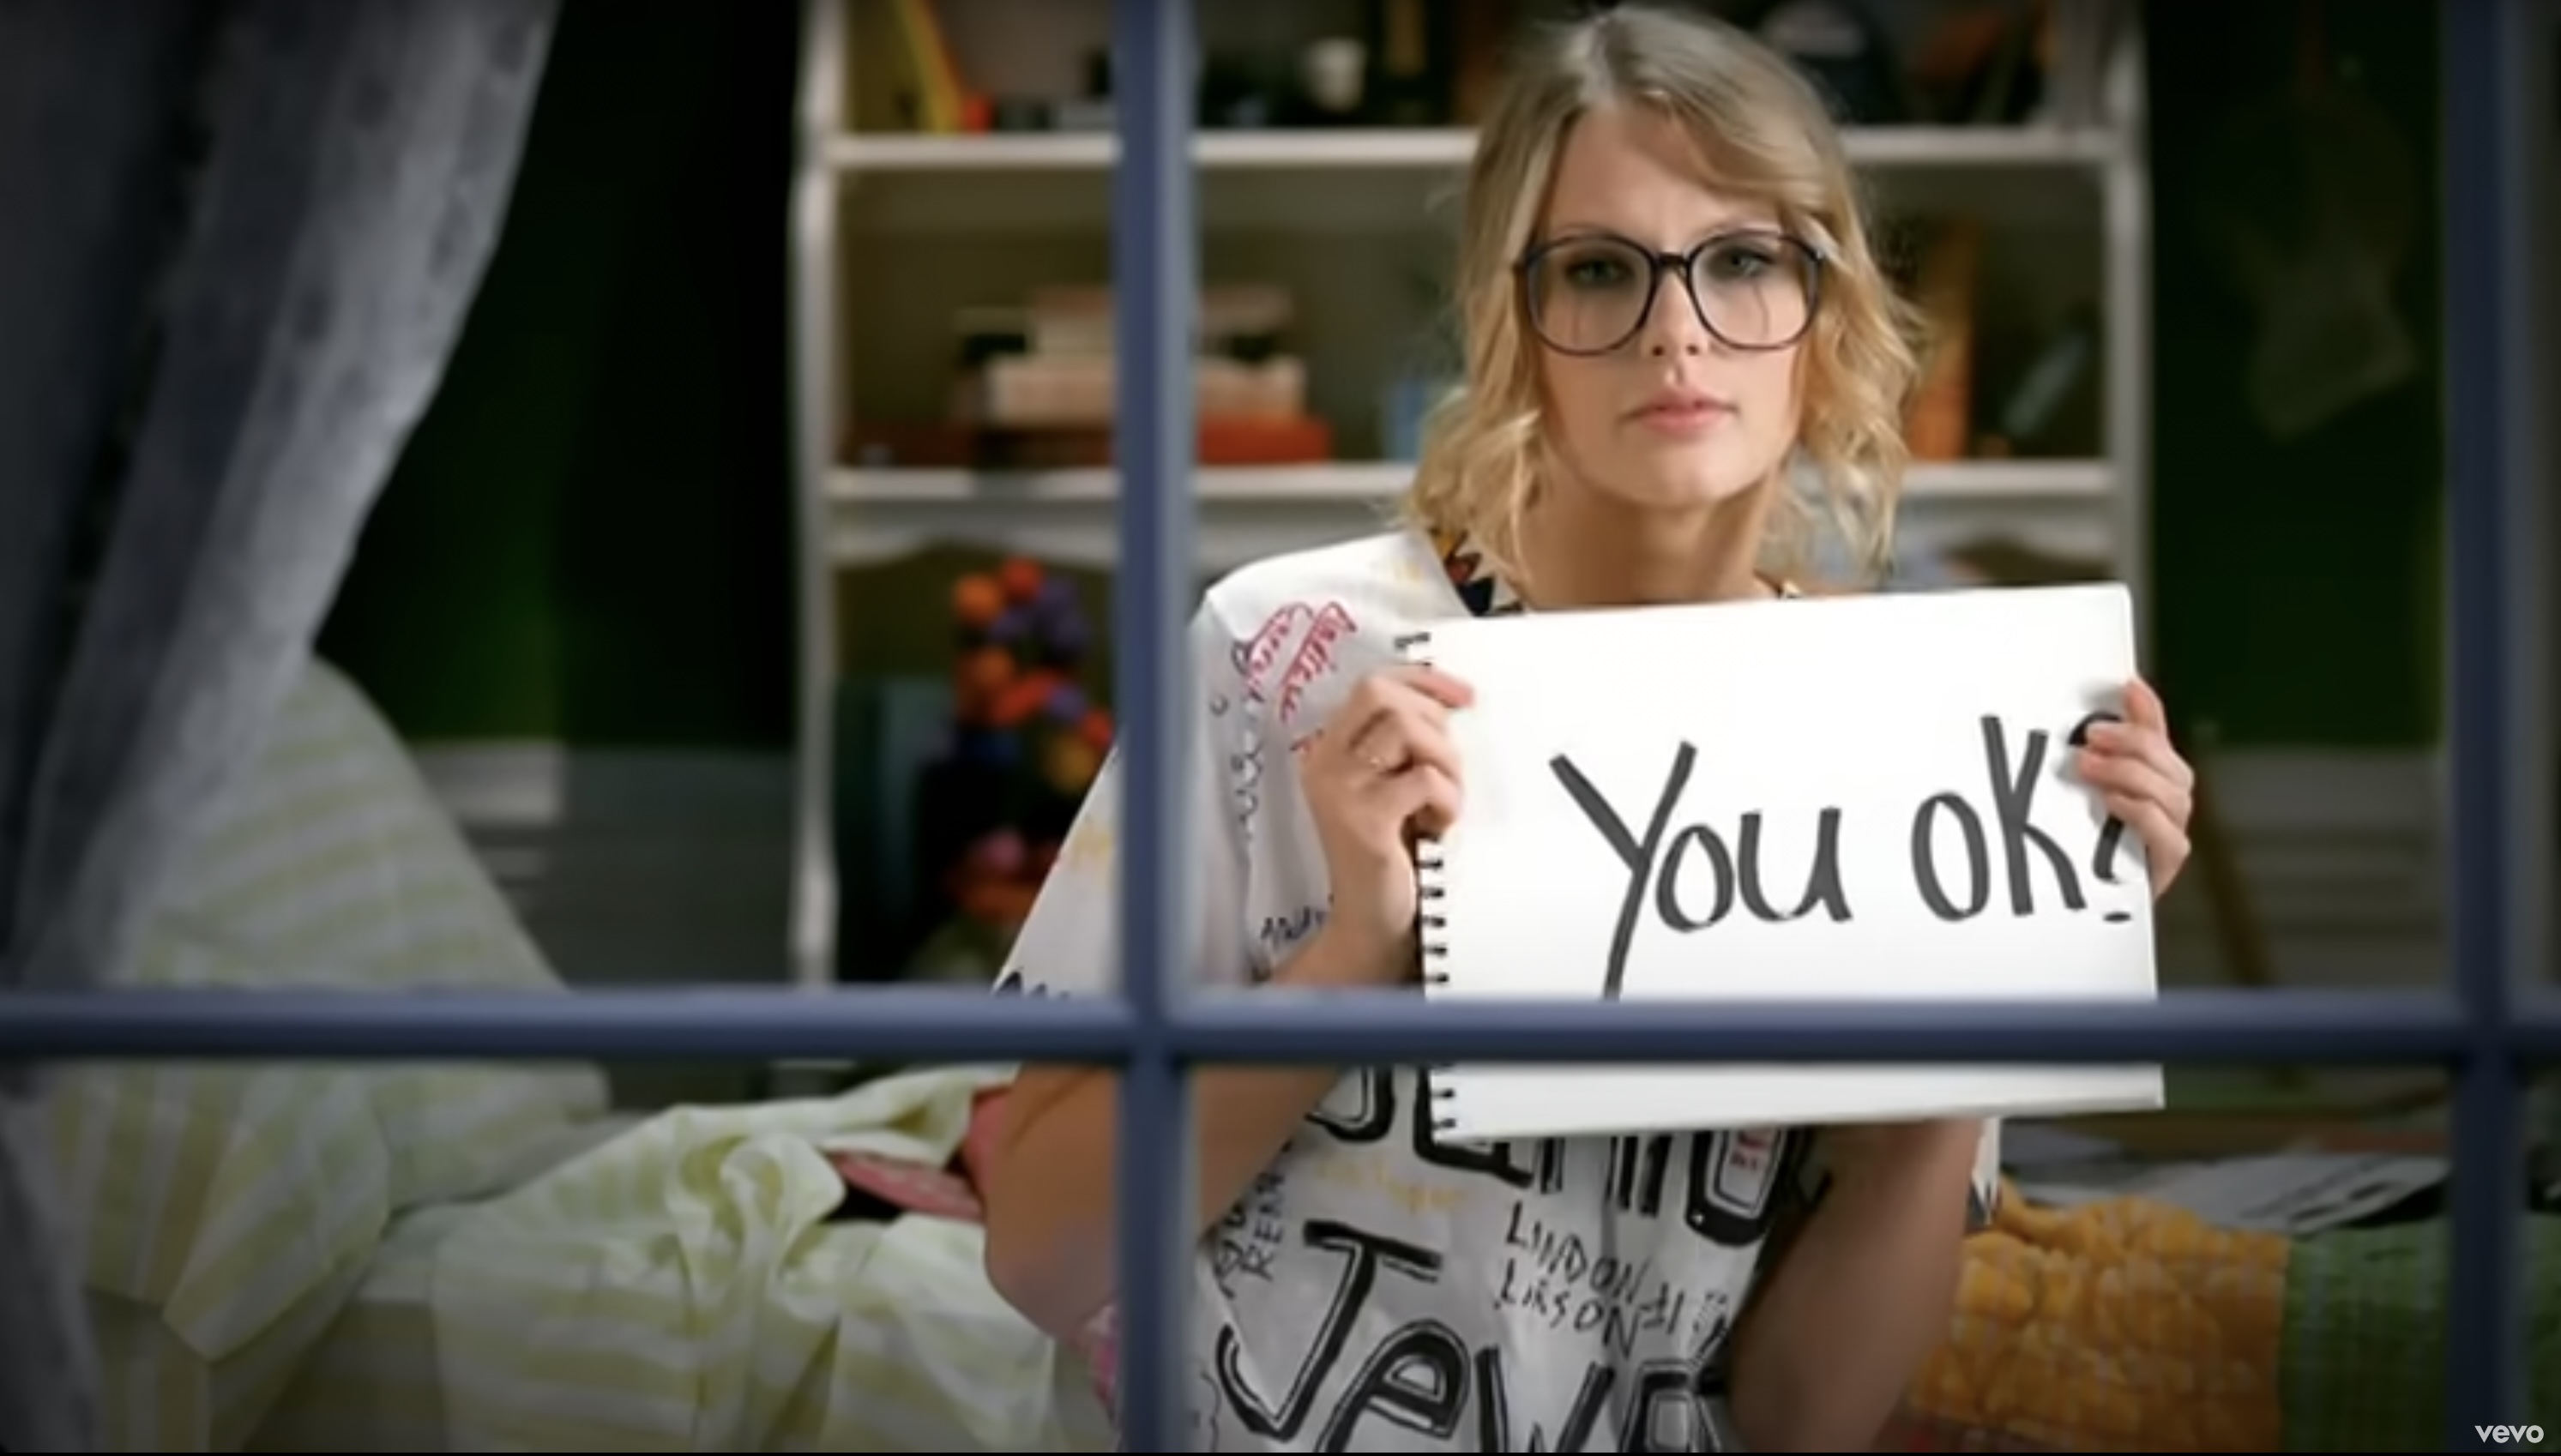 Now we can see. You belong with me Тейлор. Taylor Swift belong. Тейлор Свифт me. You ok Taylor Swift.